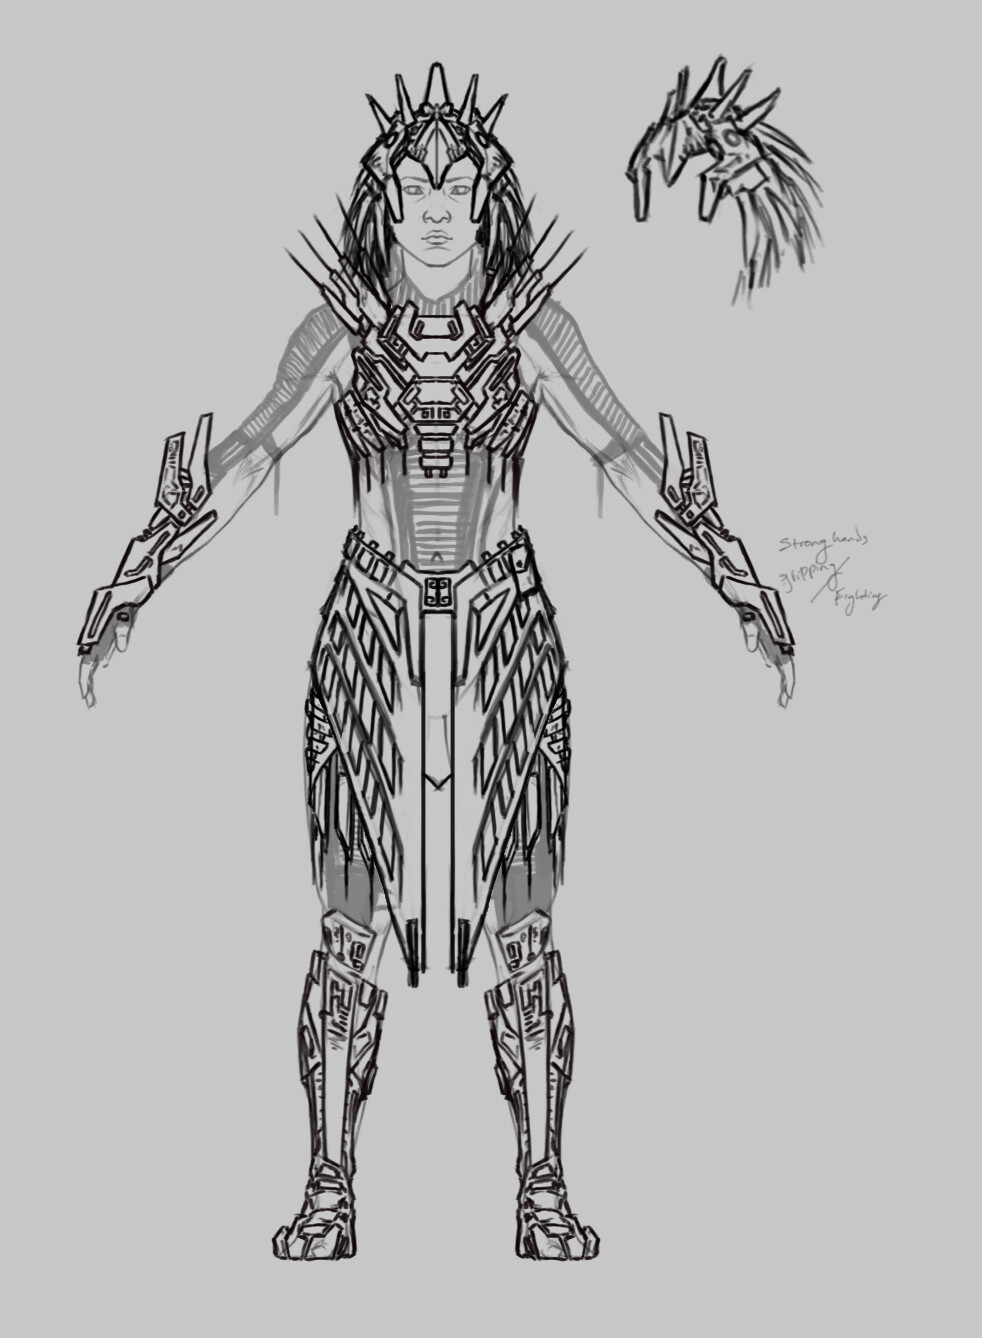 Main character armor sketch